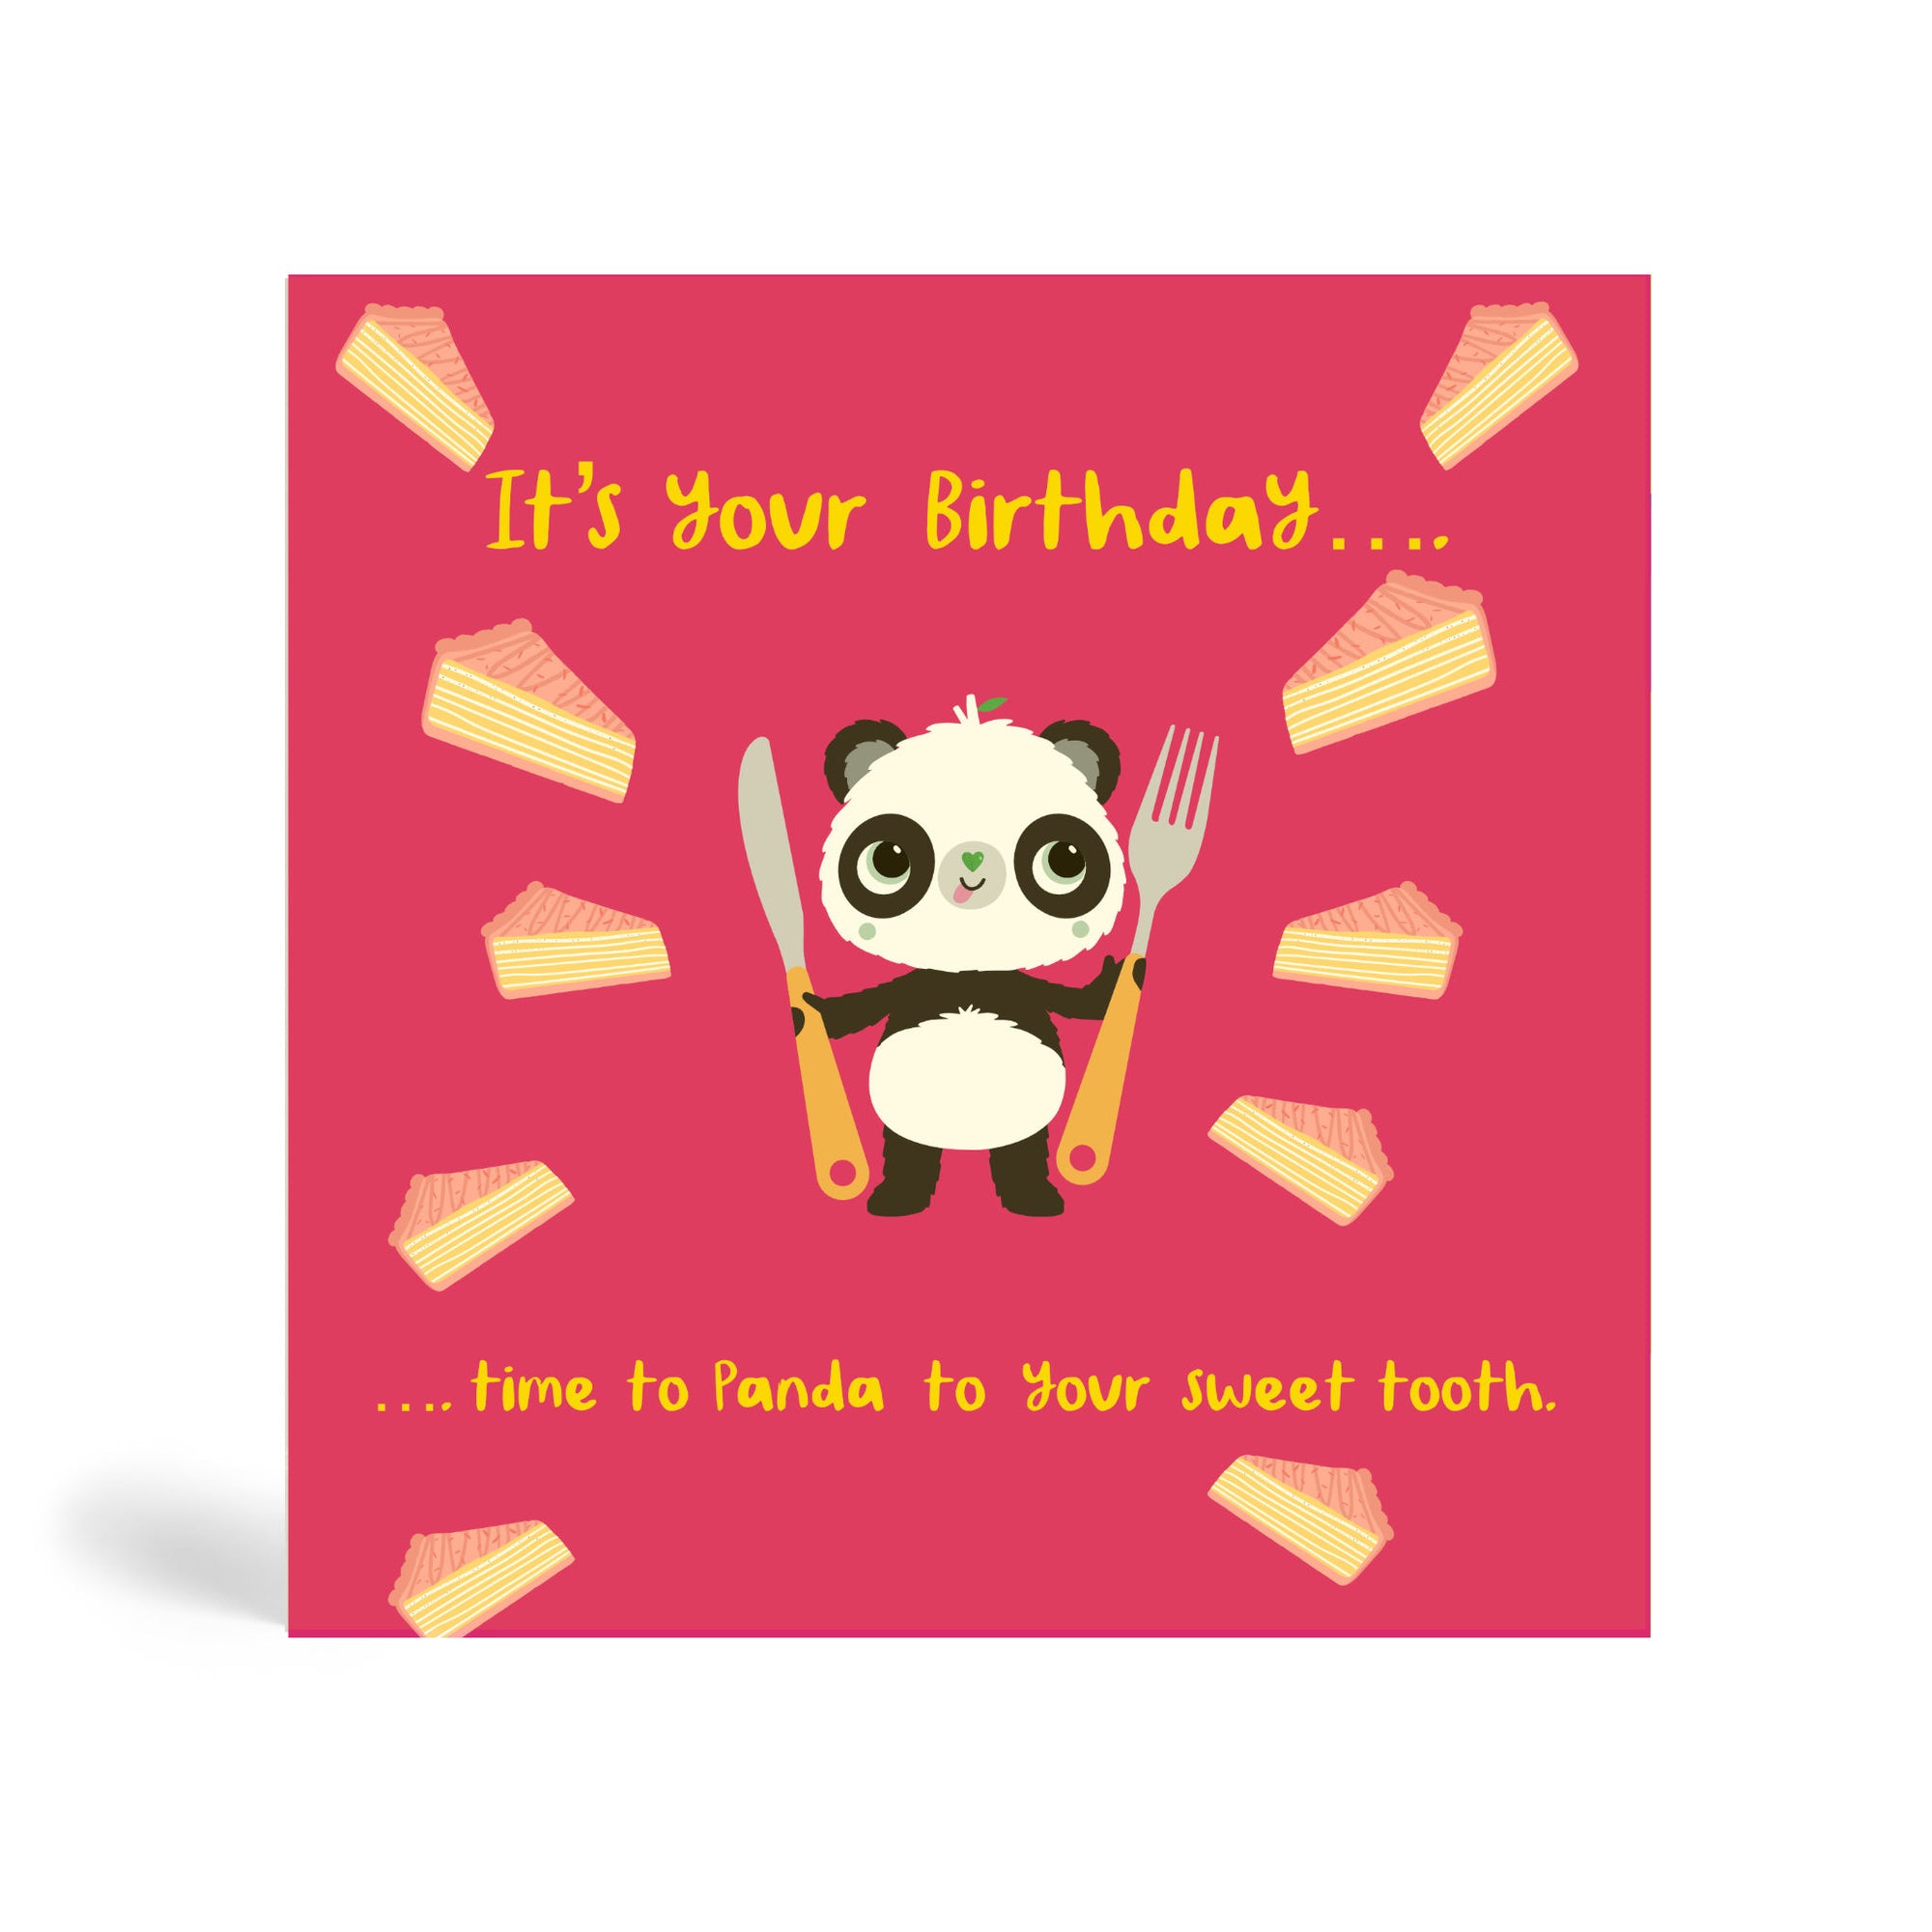 150mm square eco-friendly, tree free, birthday greeting card with Panda standing, holding fork and knife surrounded by slices of birthday cakes. It's your Birthday.... time to Panda to your sweet tooth. In bright red colour.